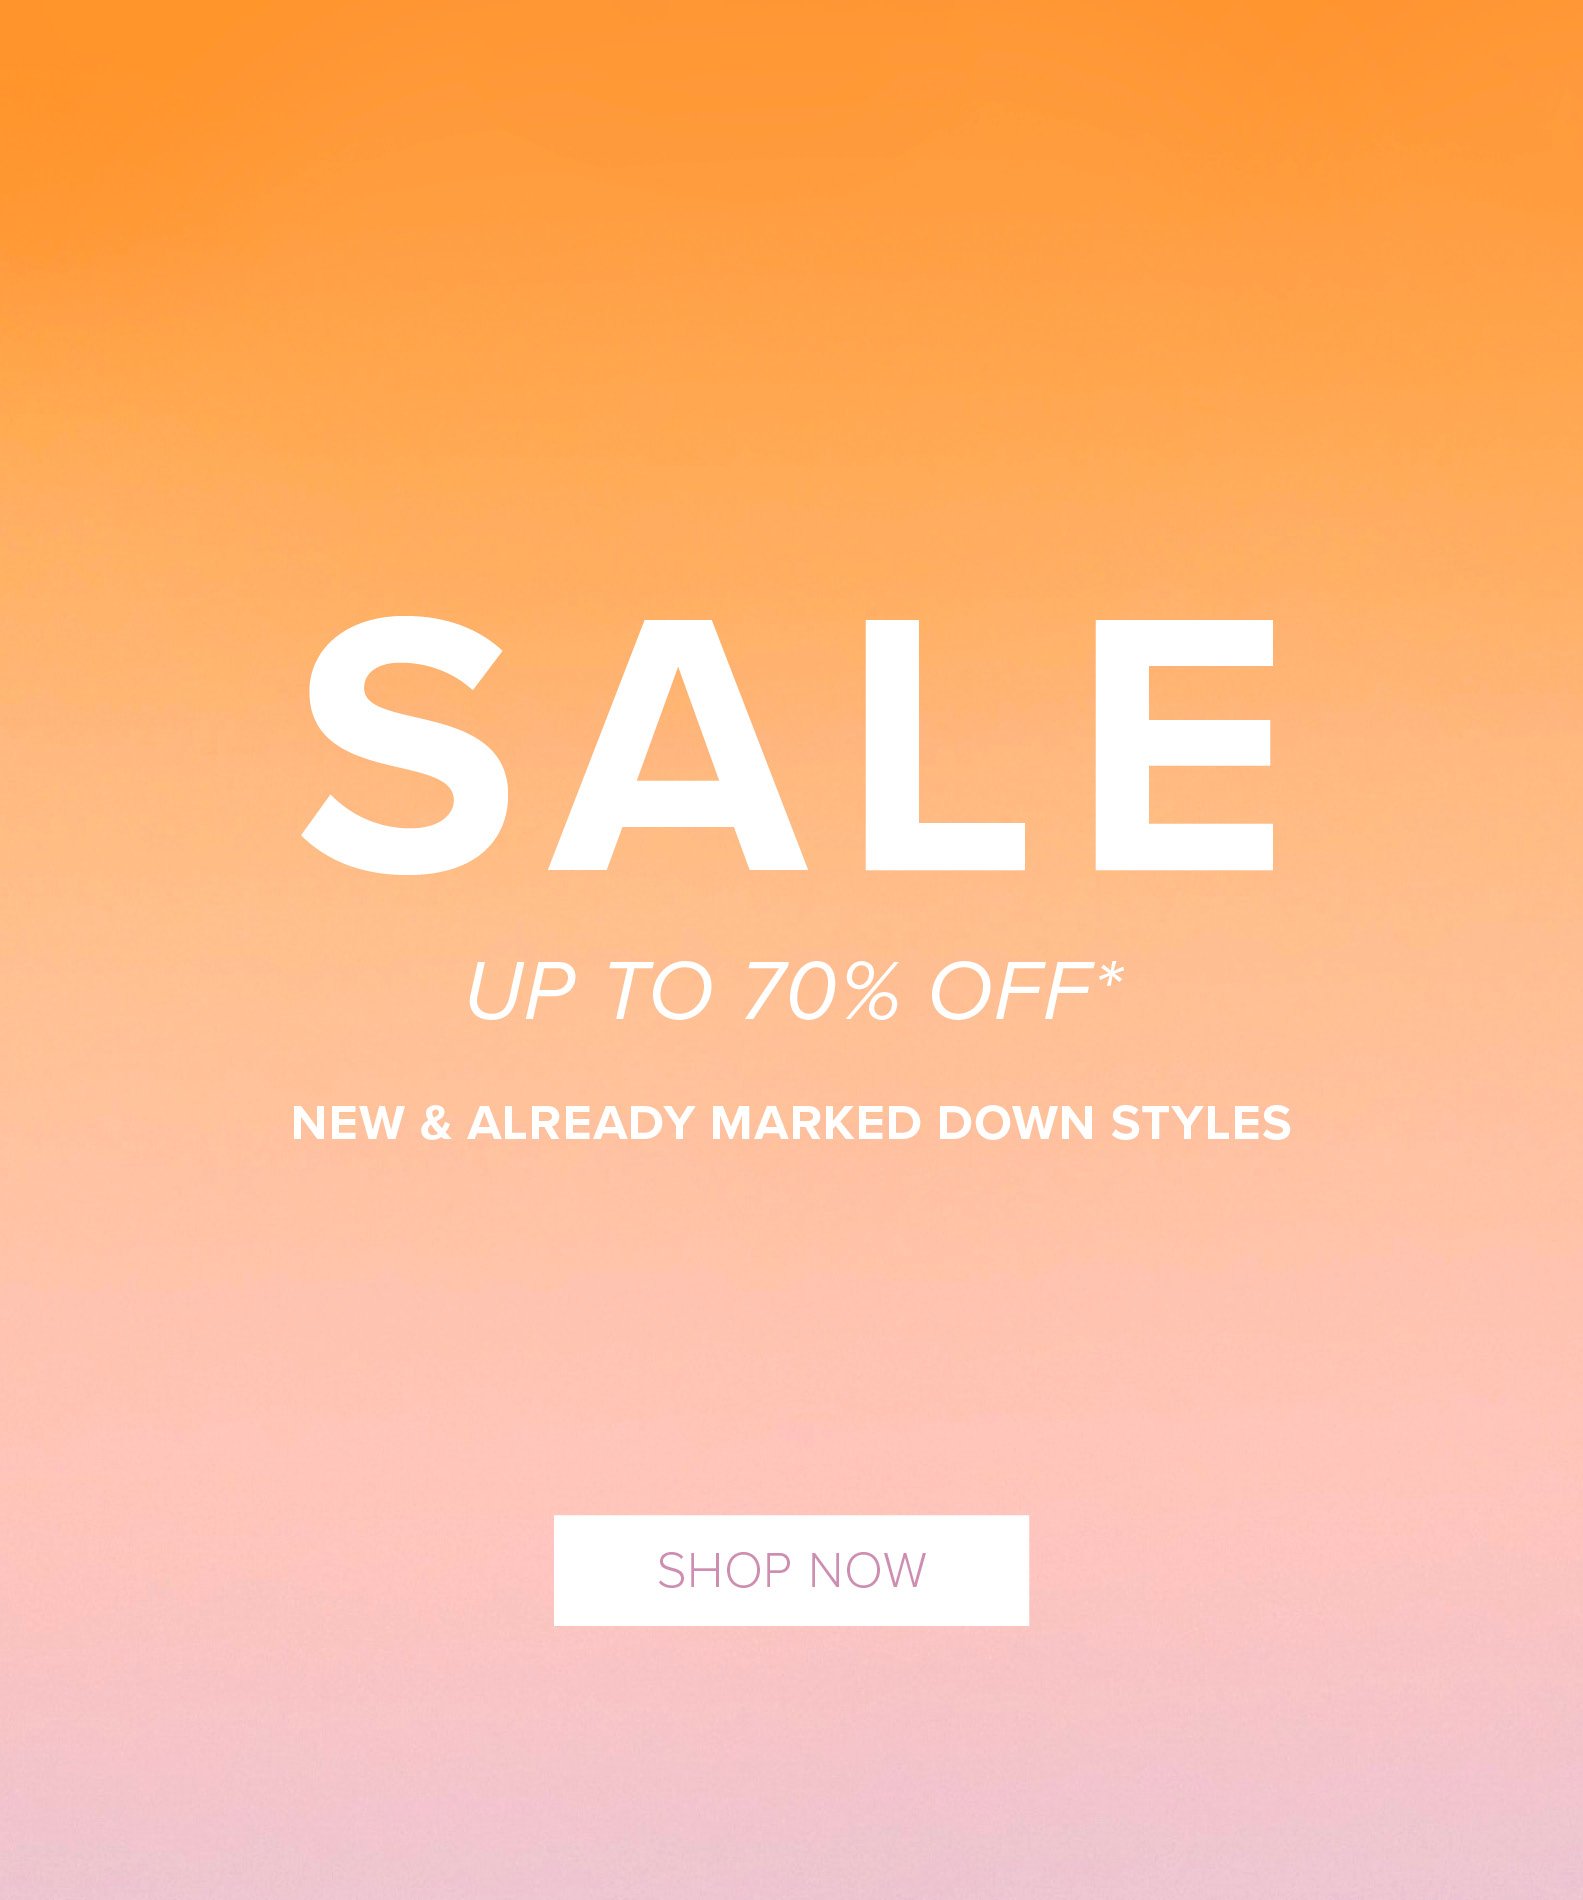 Sale On Now - Up To 70% Off